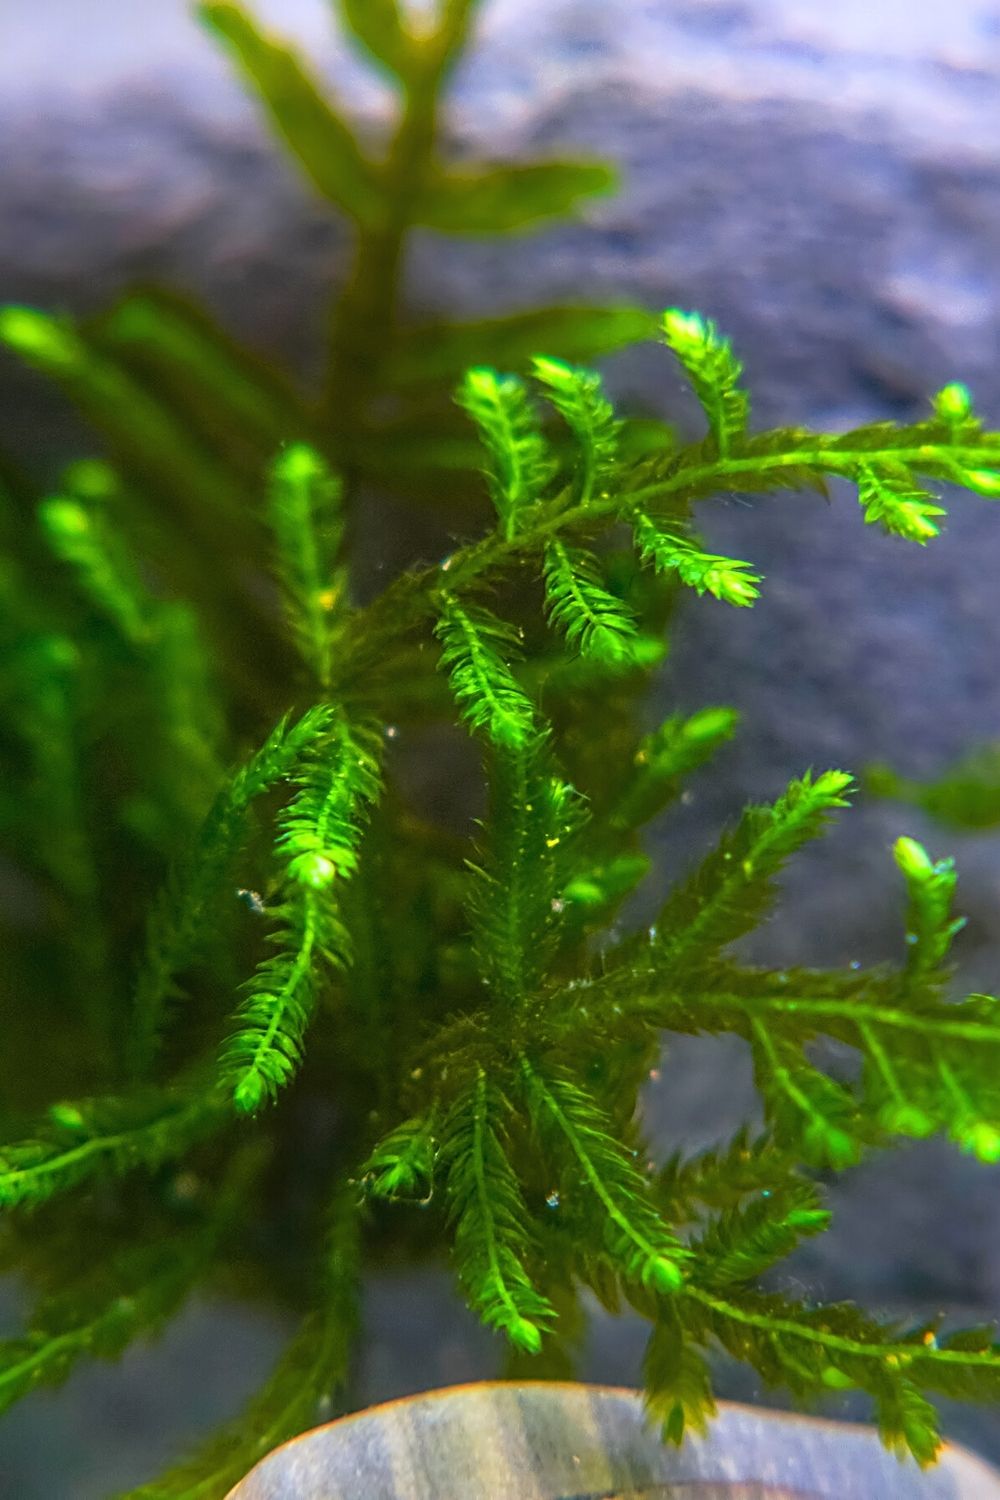 Christmas Moss grows well in a betta fish's tank if the water cycle's maintained well